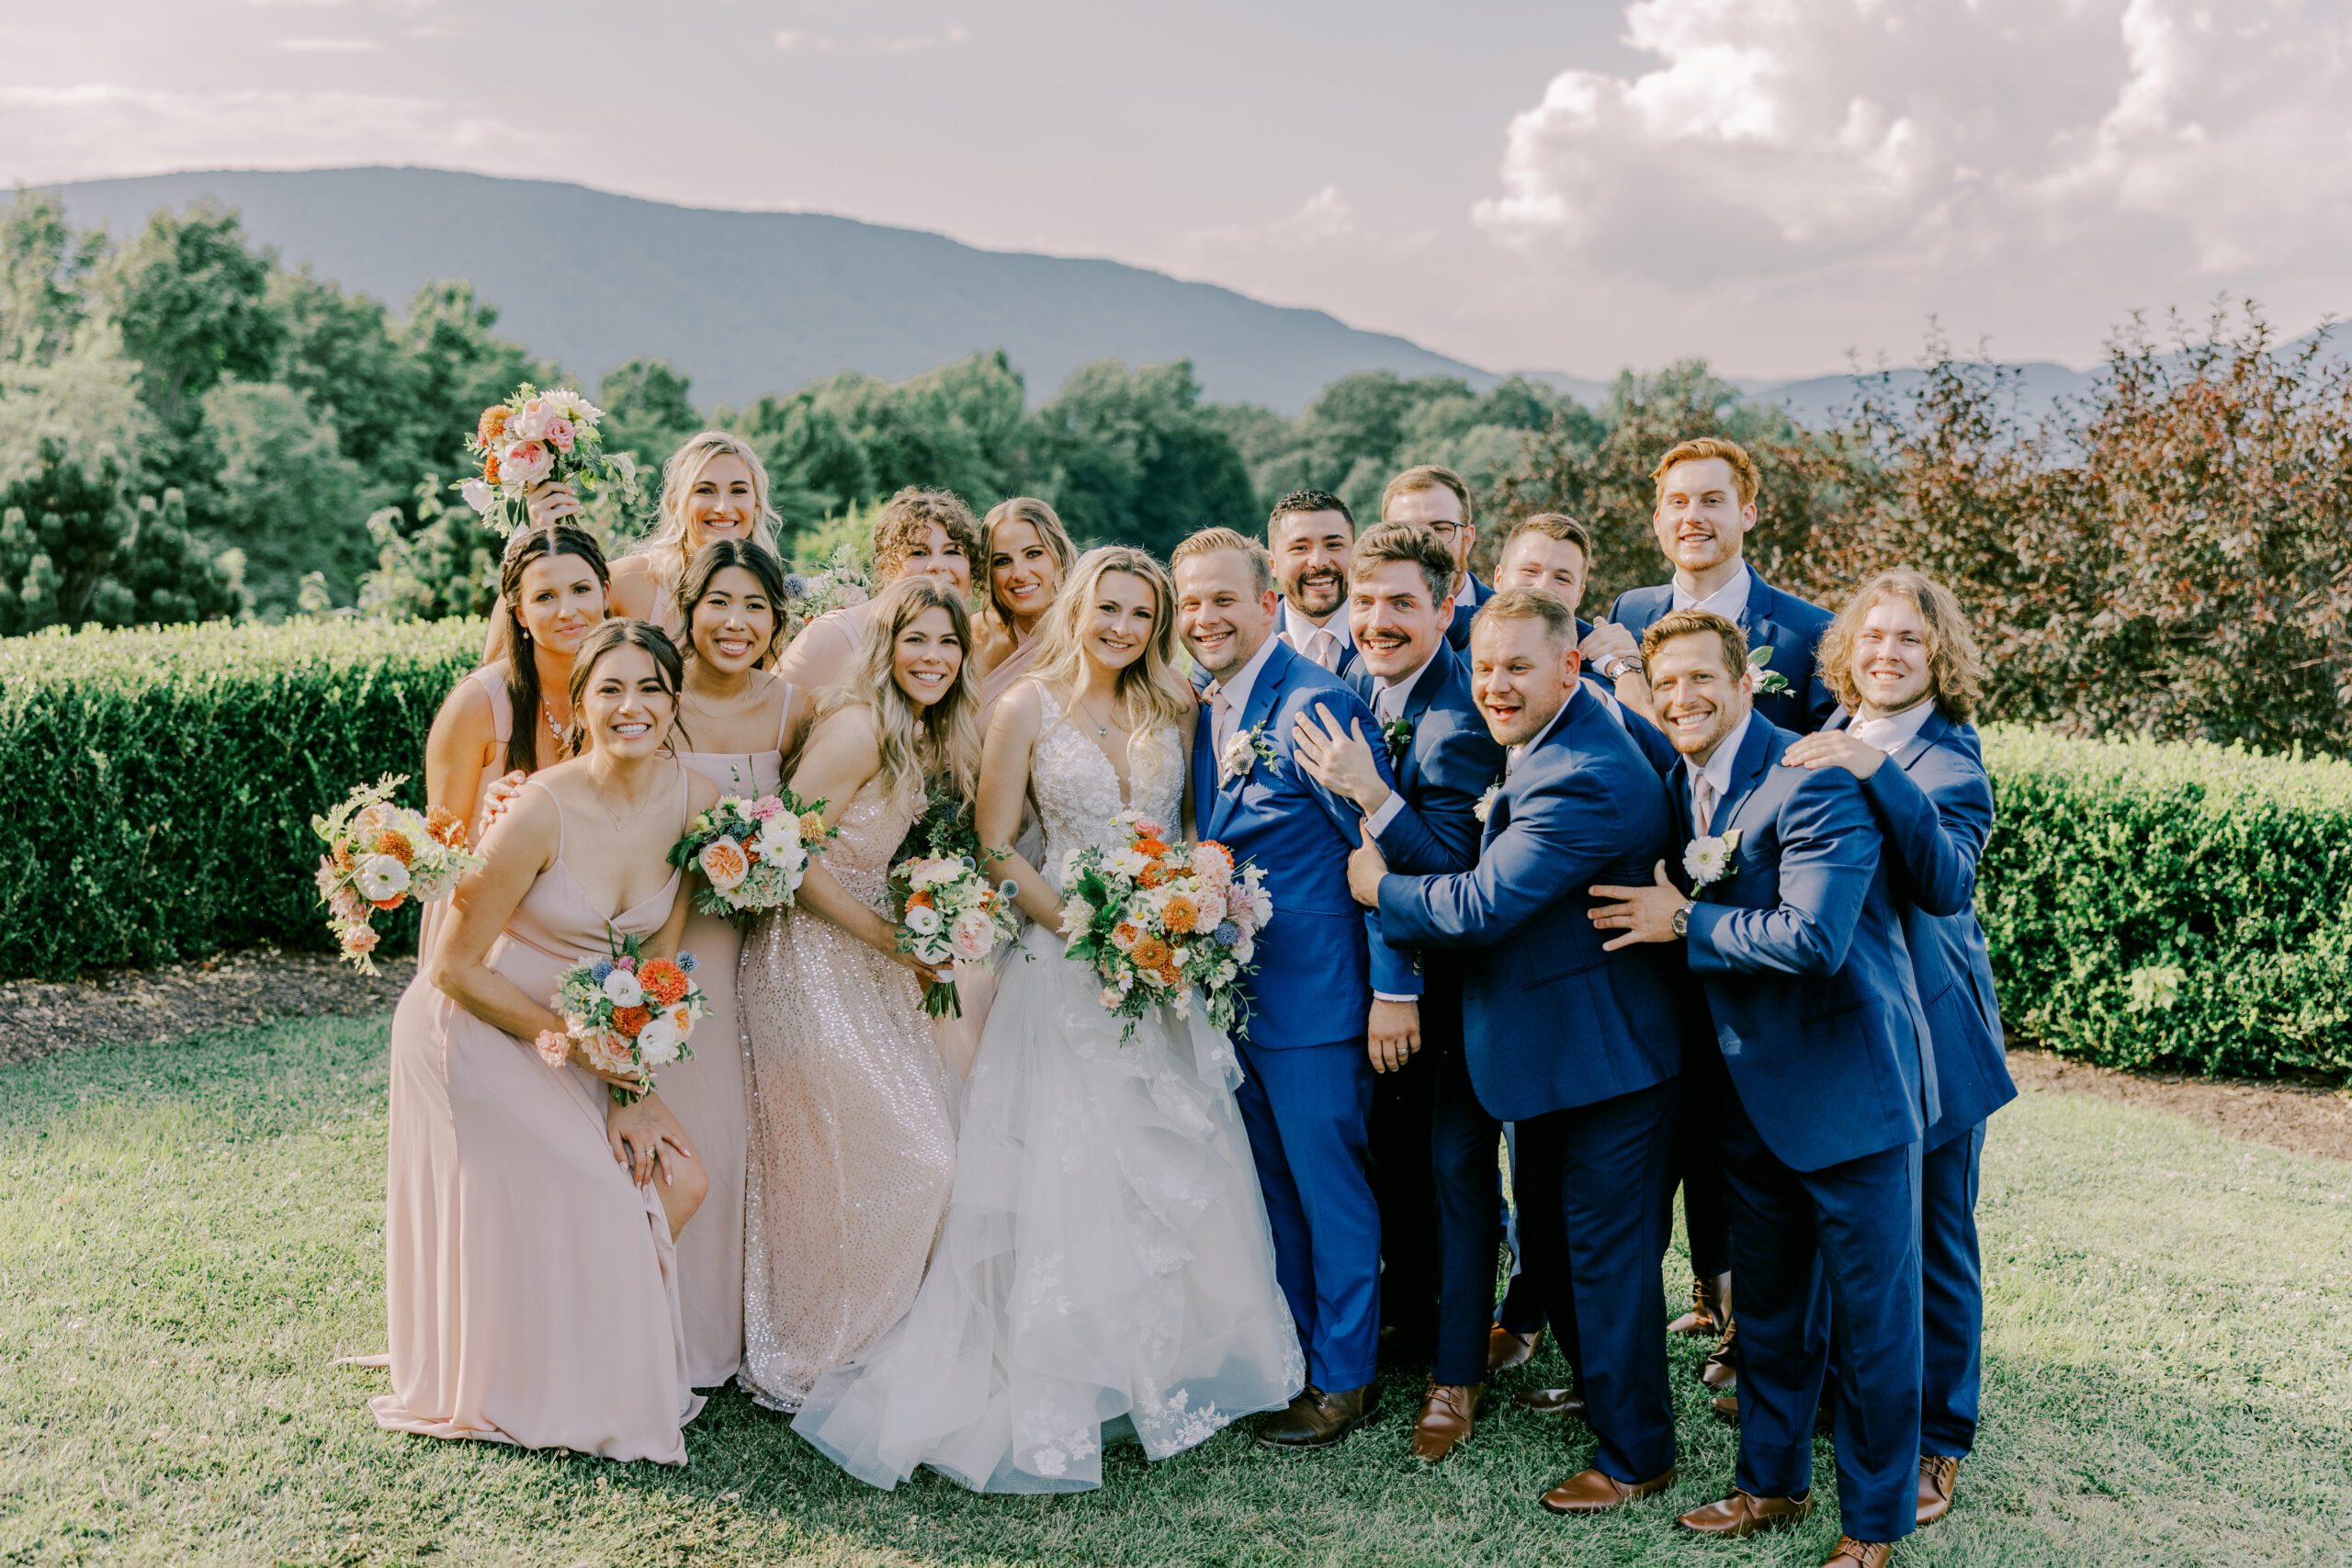 Bride and groom smiling as they're surrounded by bridesmaids and groomsmen huddled in